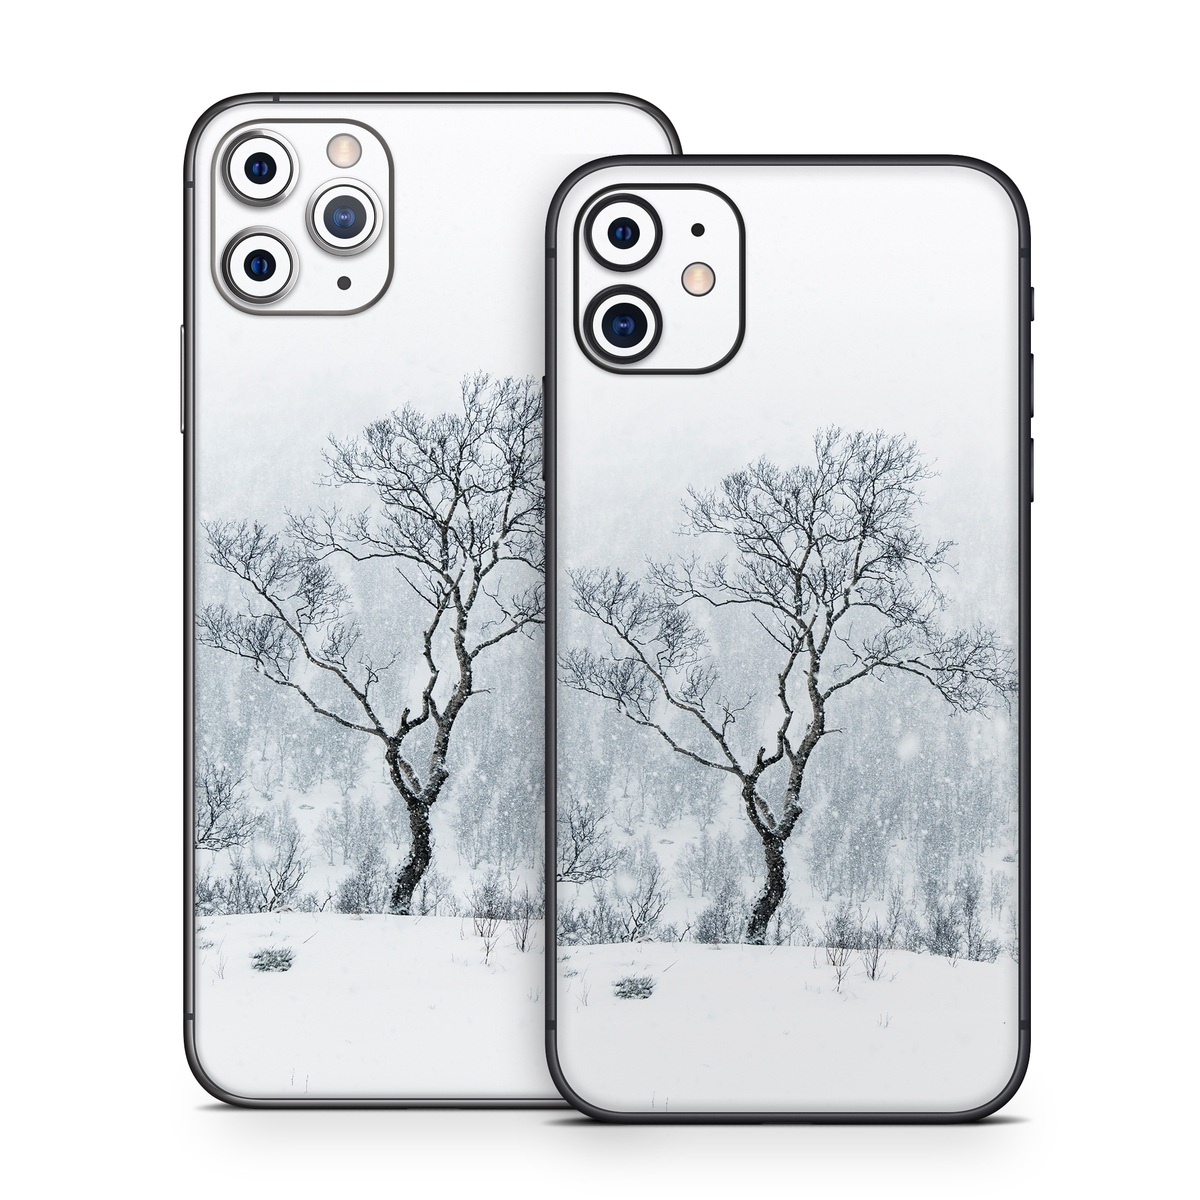 iPhone 11 Series Skin design of Snow, Winter, Tree, Nature, White, Sky, Atmospheric phenomenon, Natural landscape, Freezing, Blizzard, with white, gray, black colors